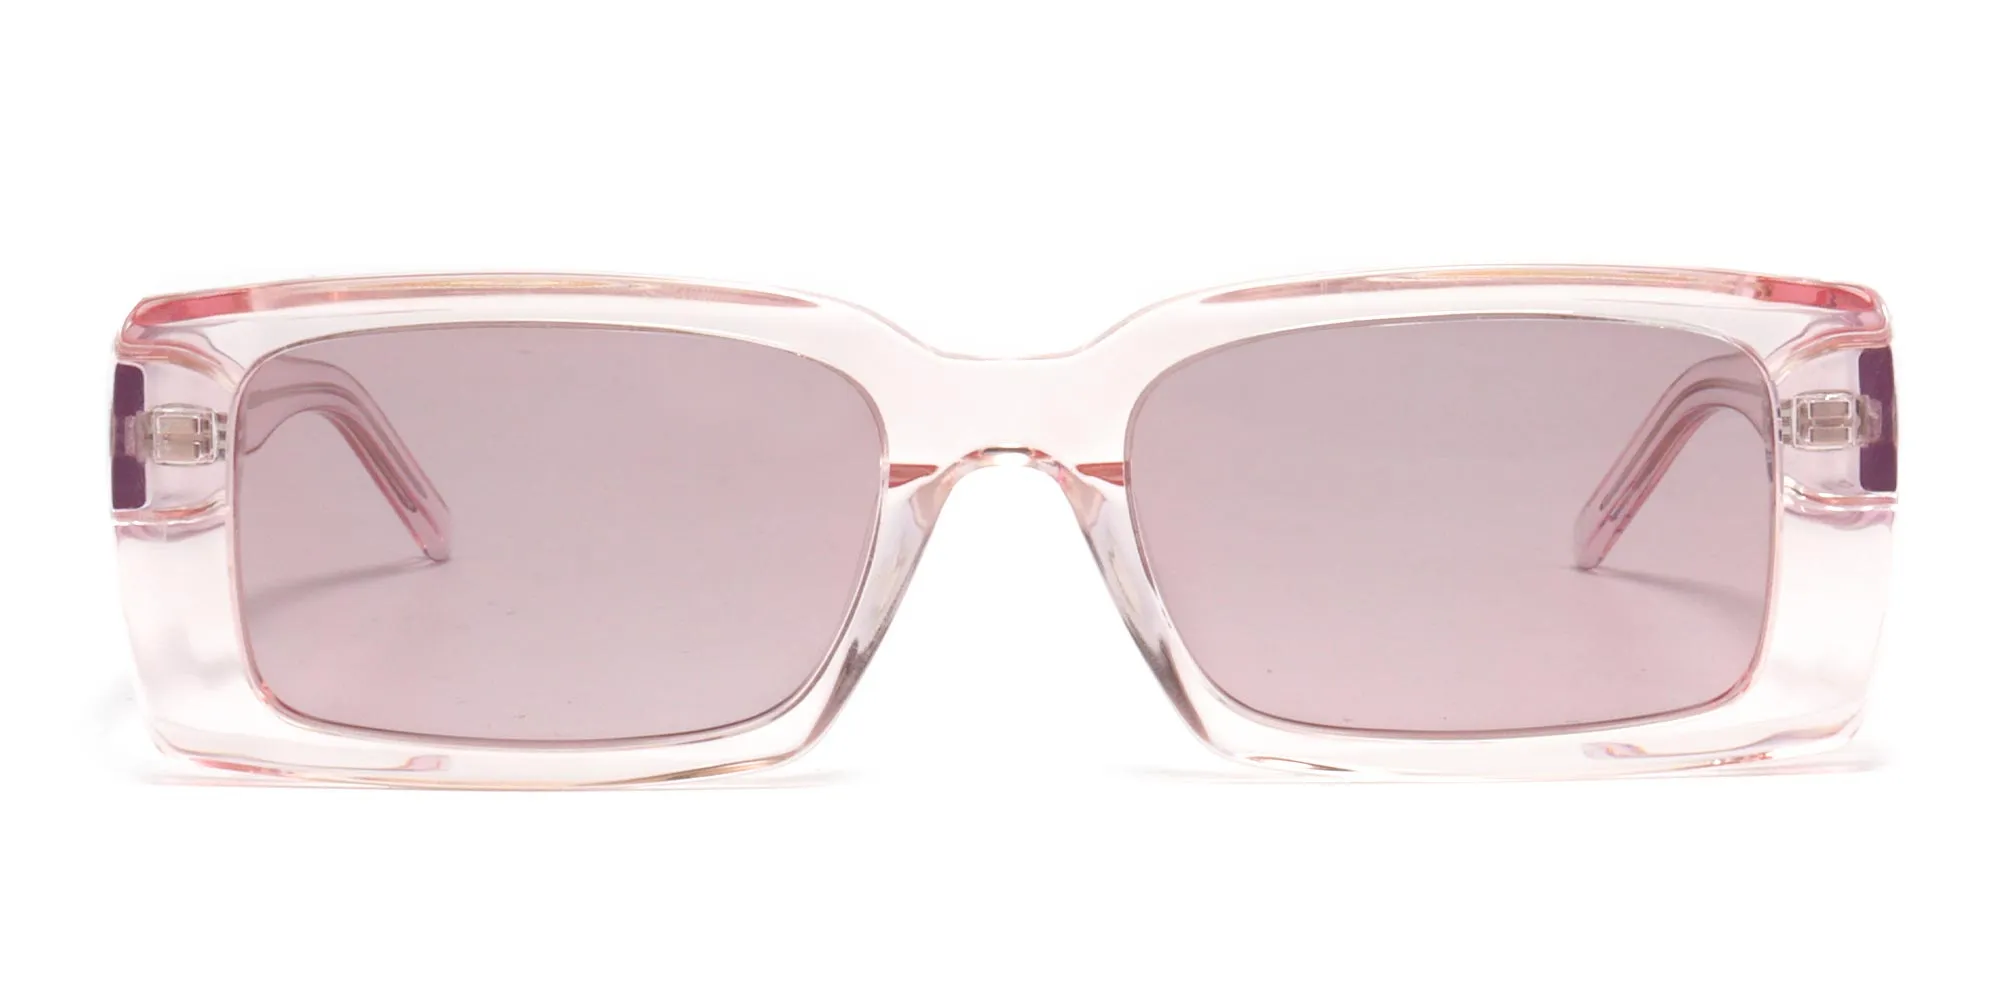 pink rectangle sunglasses for women-2